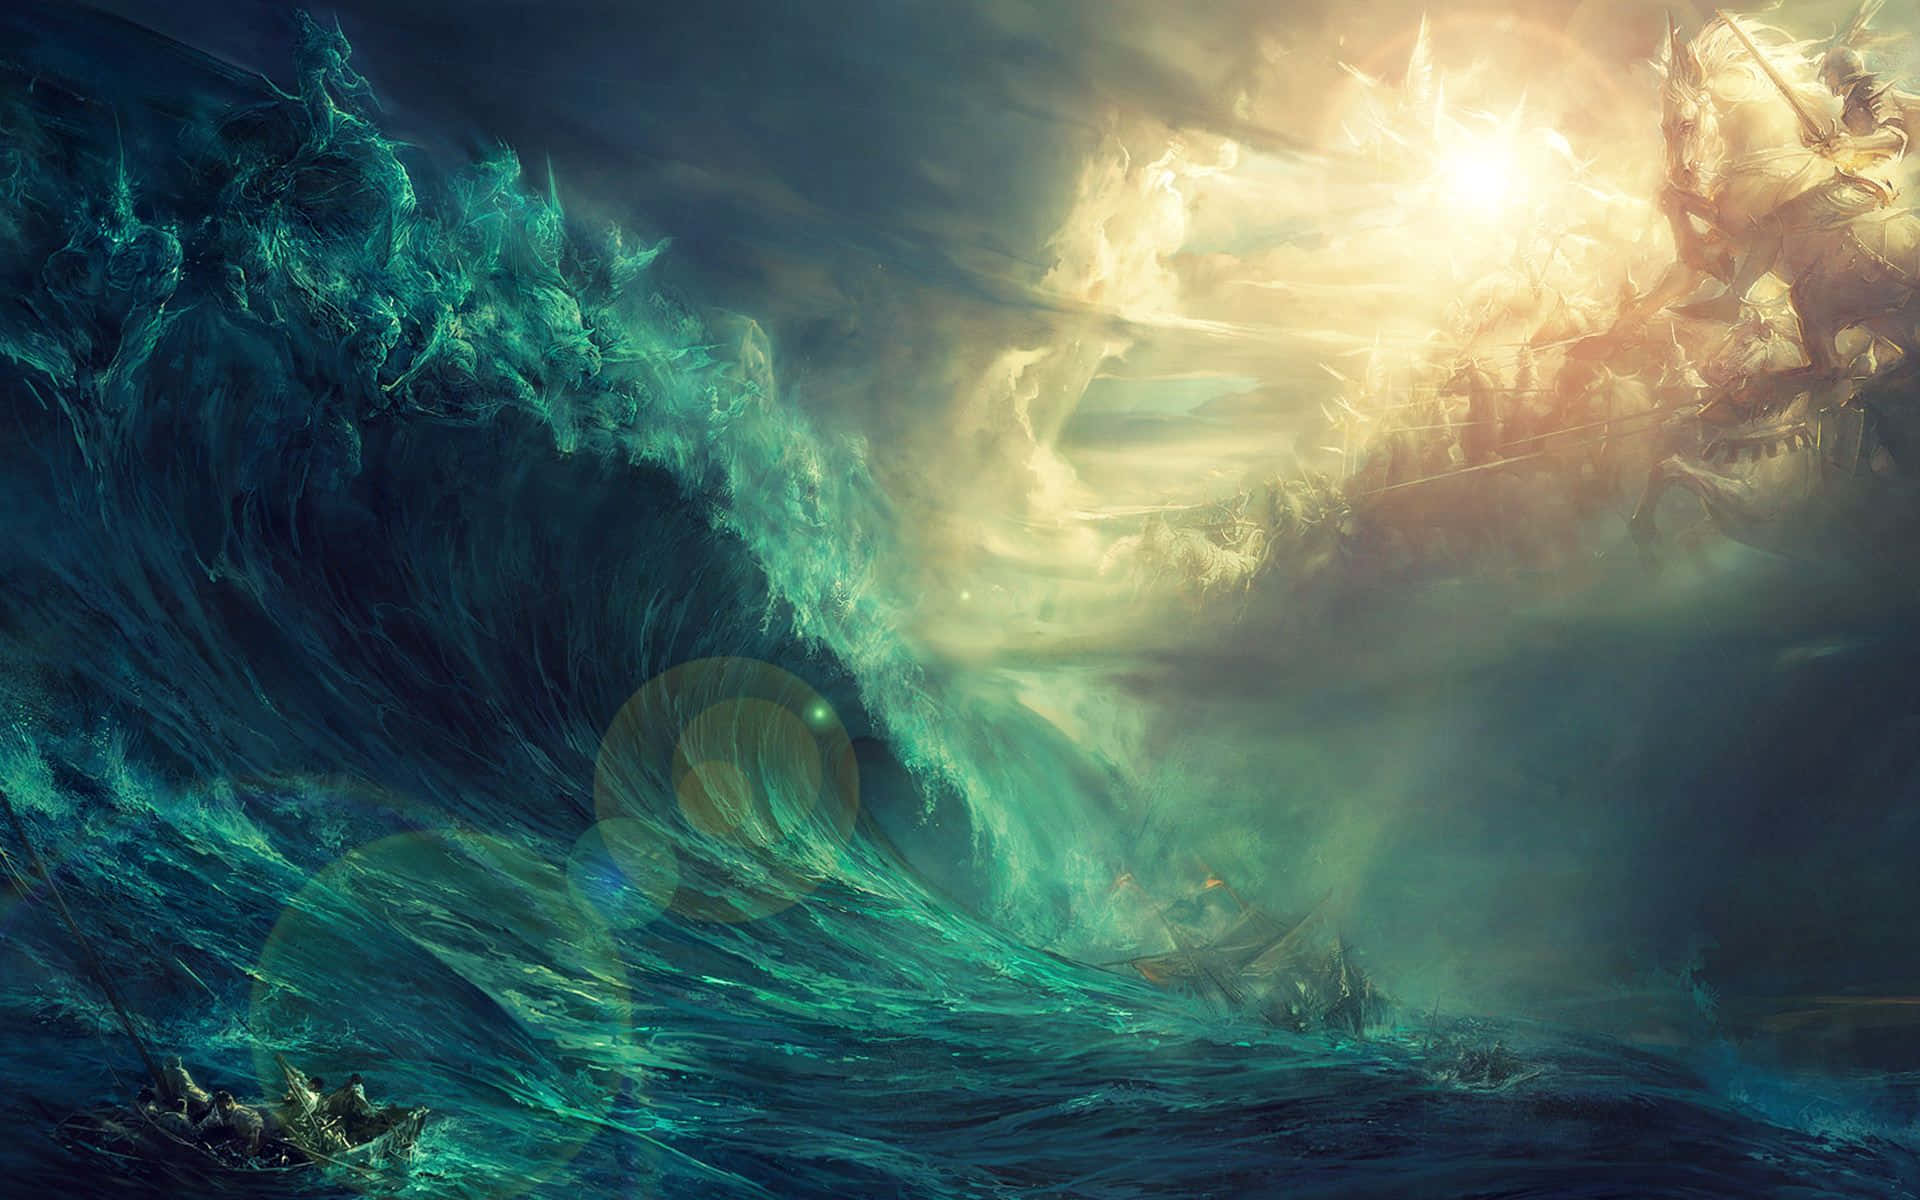 A Painting Of A Stormy Ocean With A Sun Shining On It Wallpaper